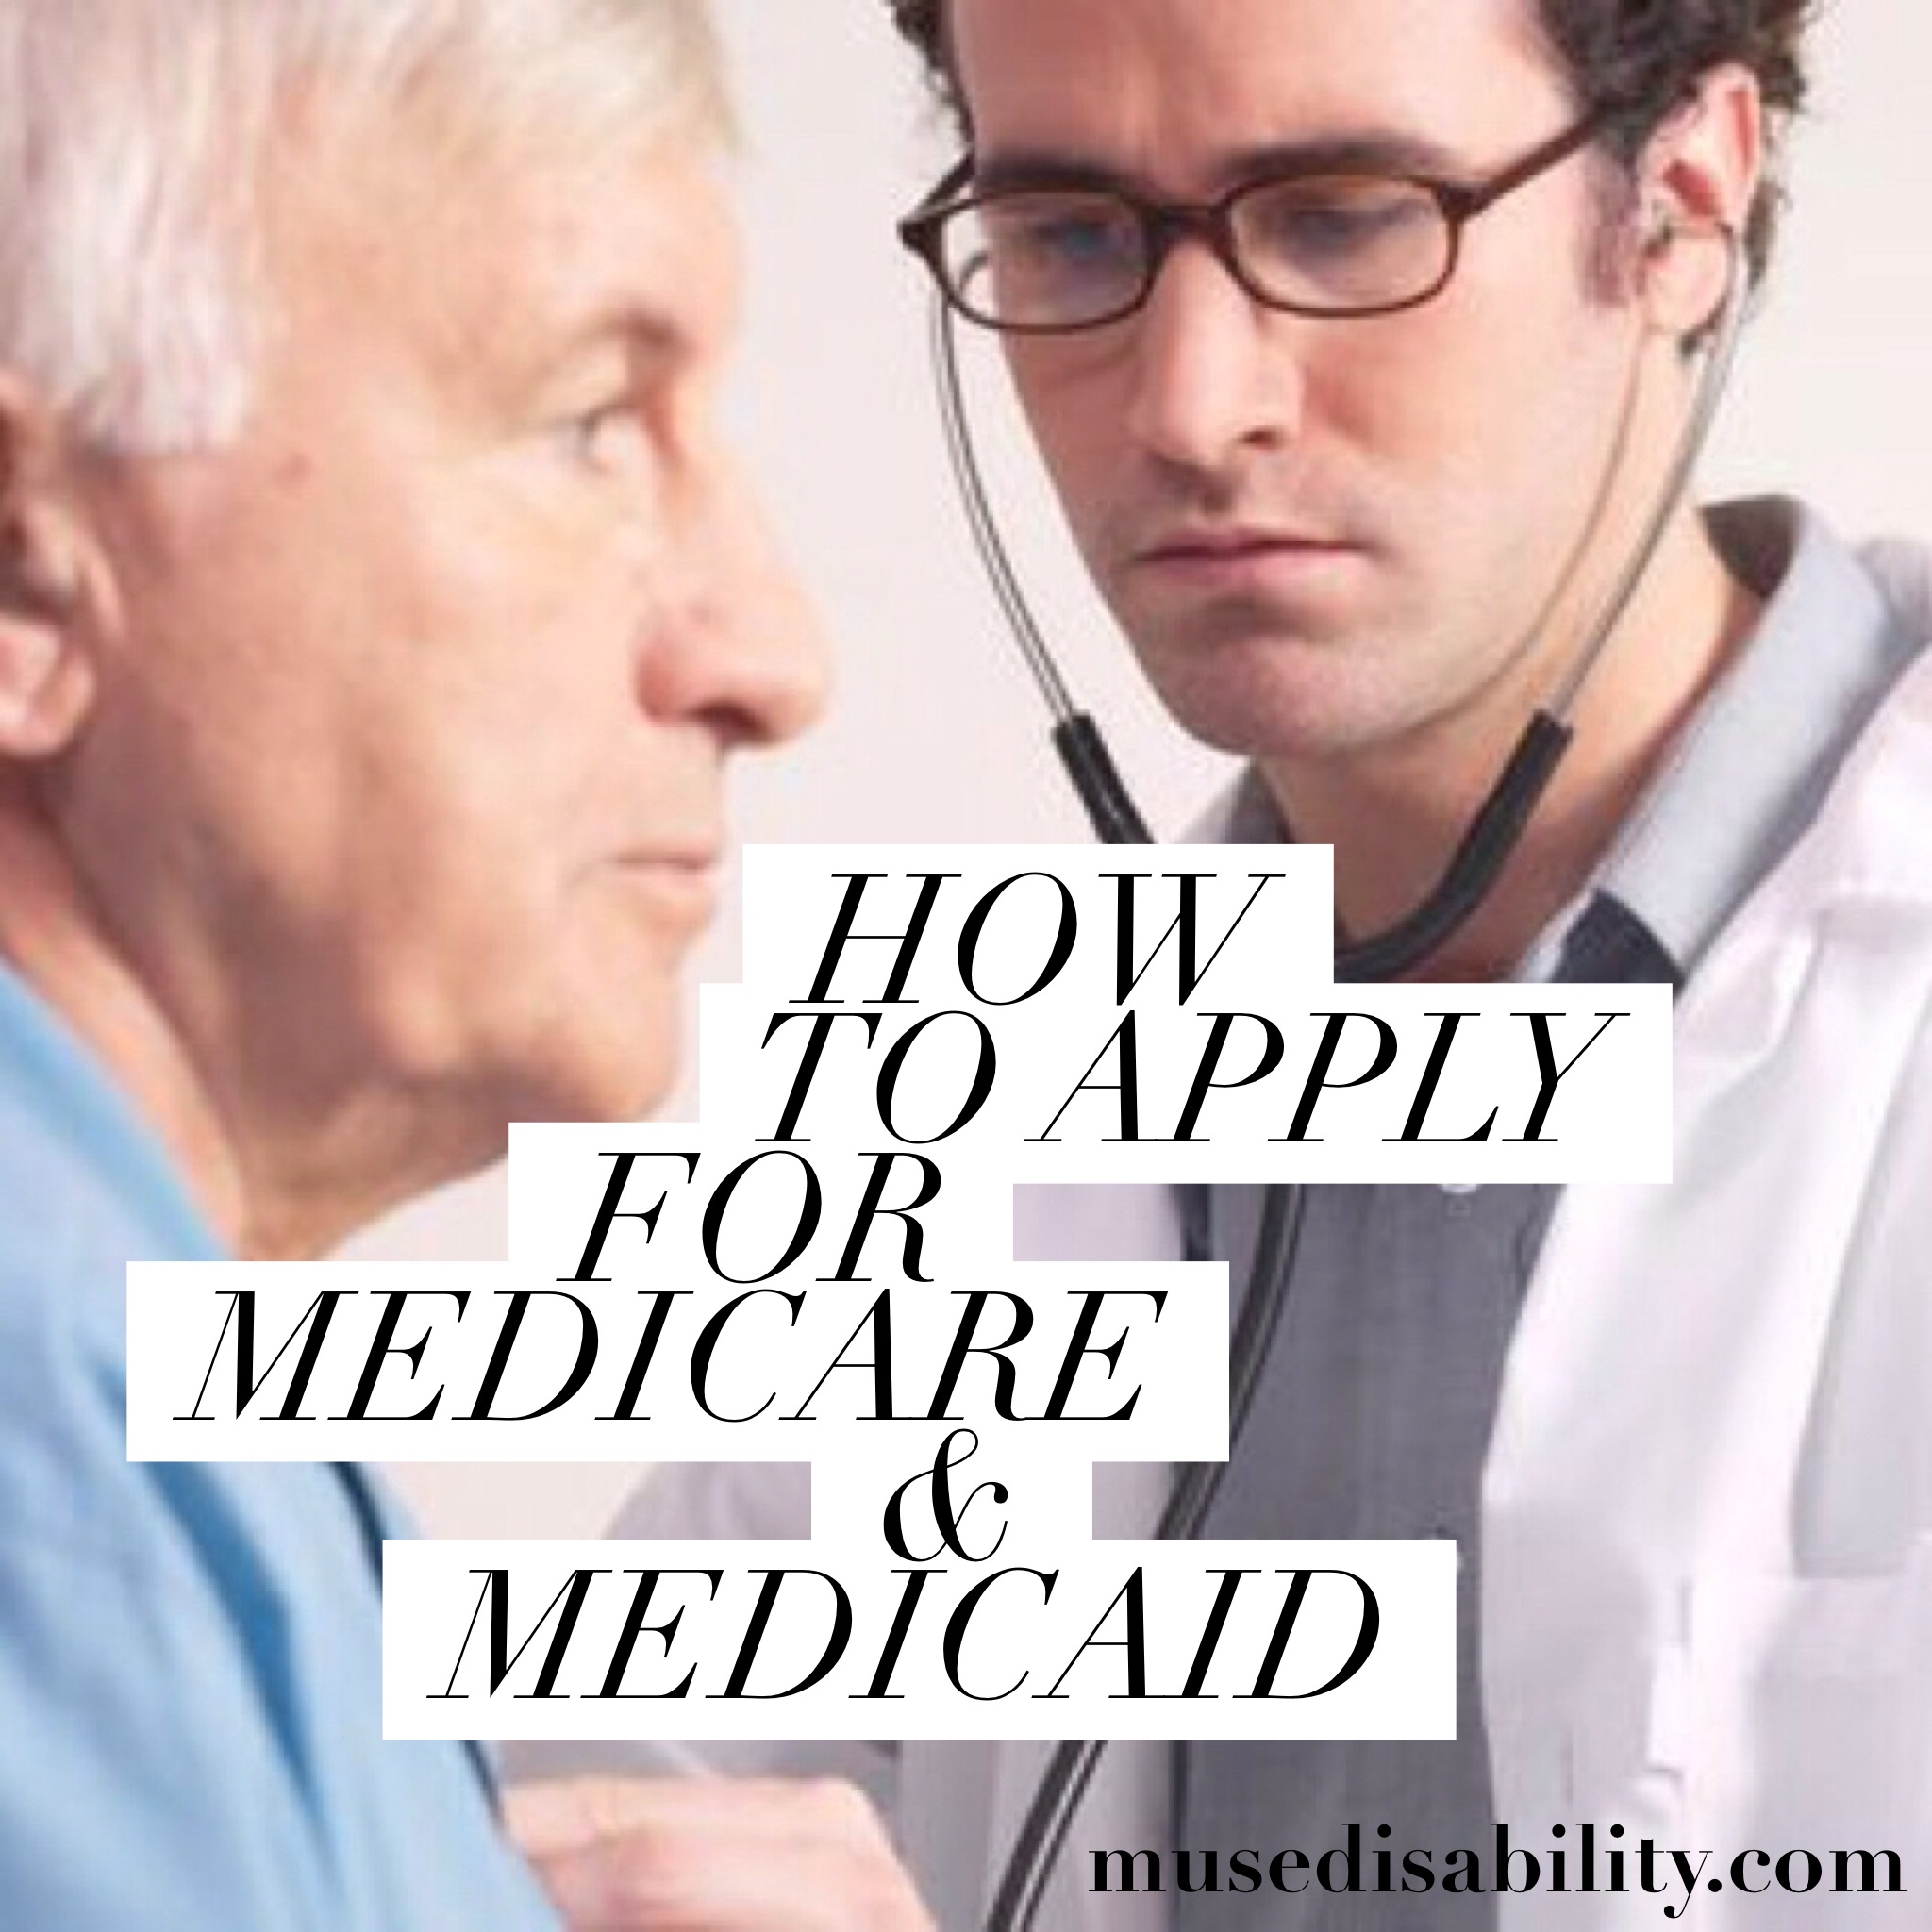 Who is eligible for Medicare and Medicaid?